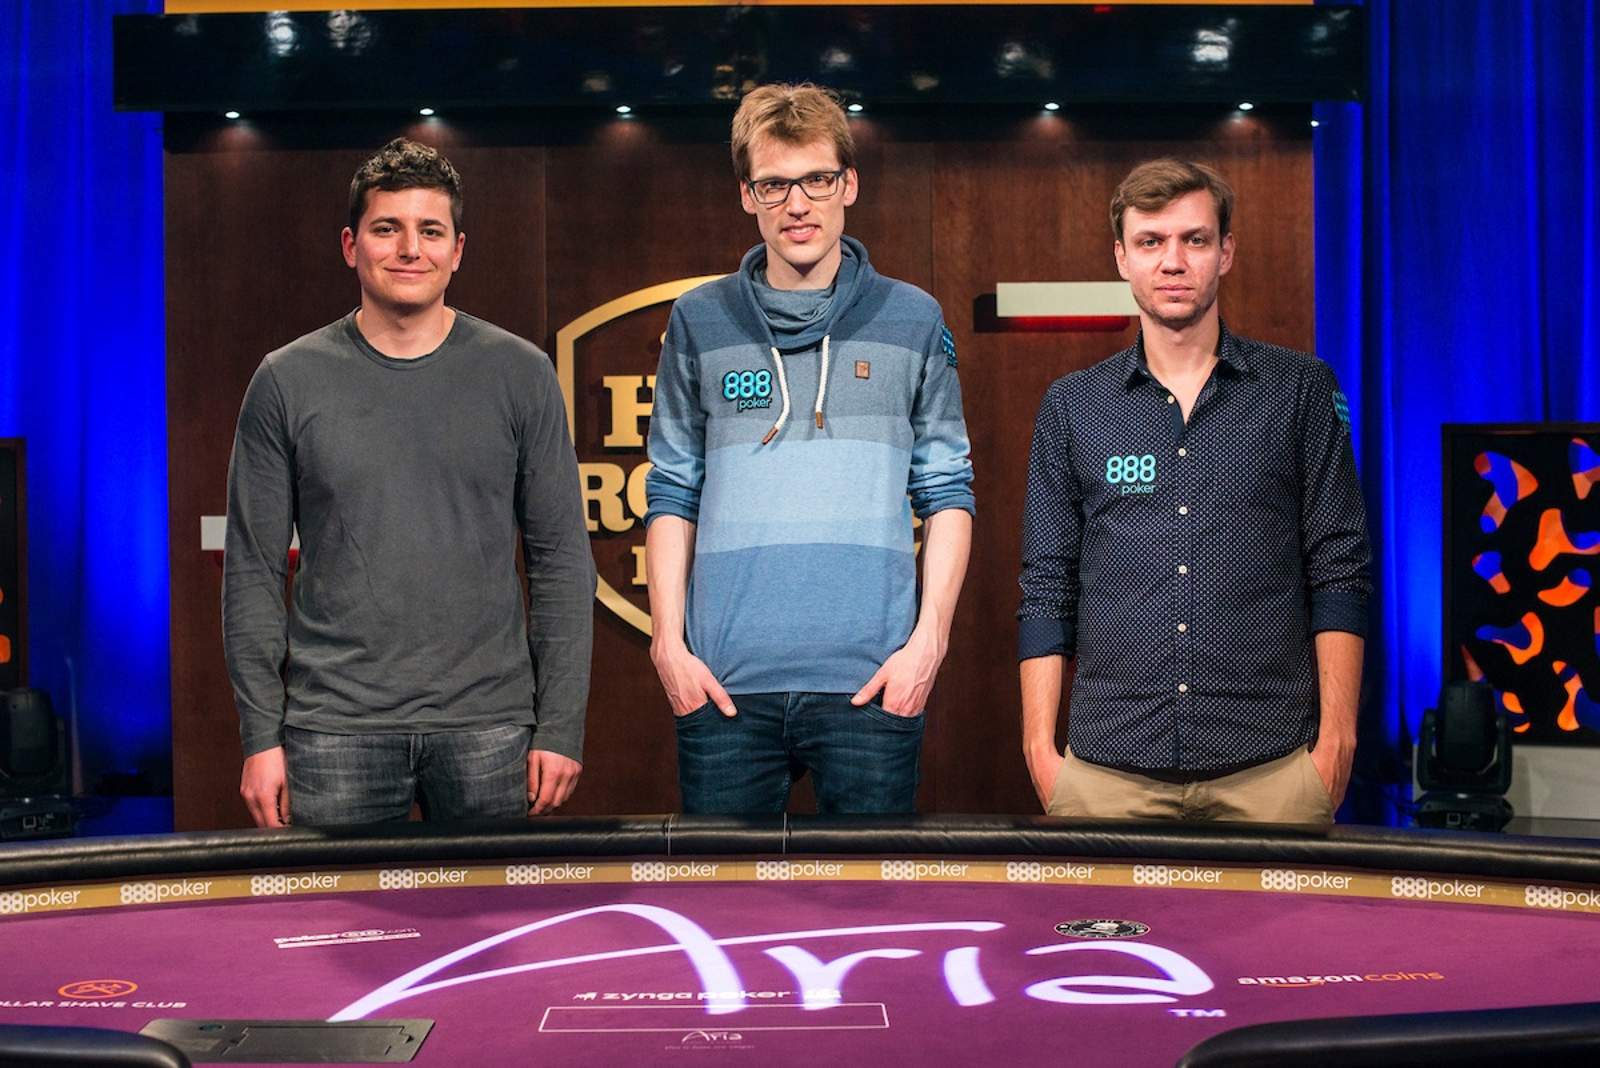 Three Super High Roller Bowl Finalists Share Thoughts